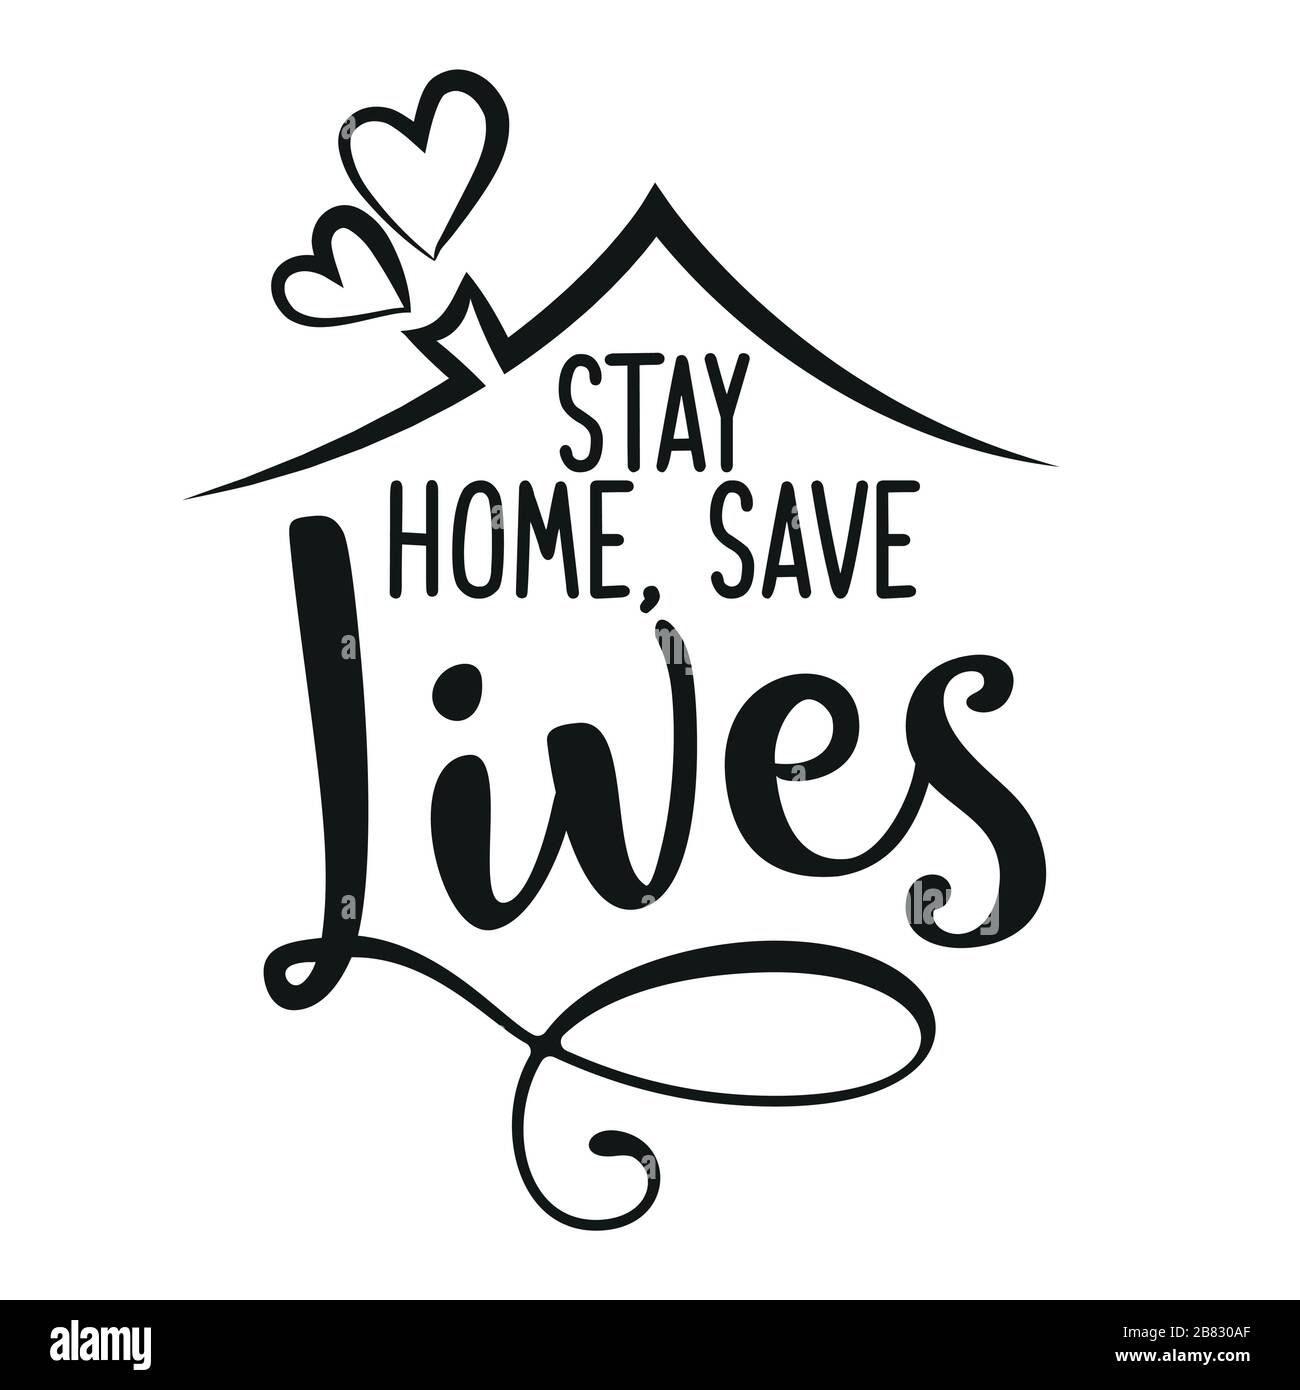 Stay home save lives - Lettering typography poster with text for self quarine times. Hand letter script motivation sign catch word art design. Vintage Stock Vector